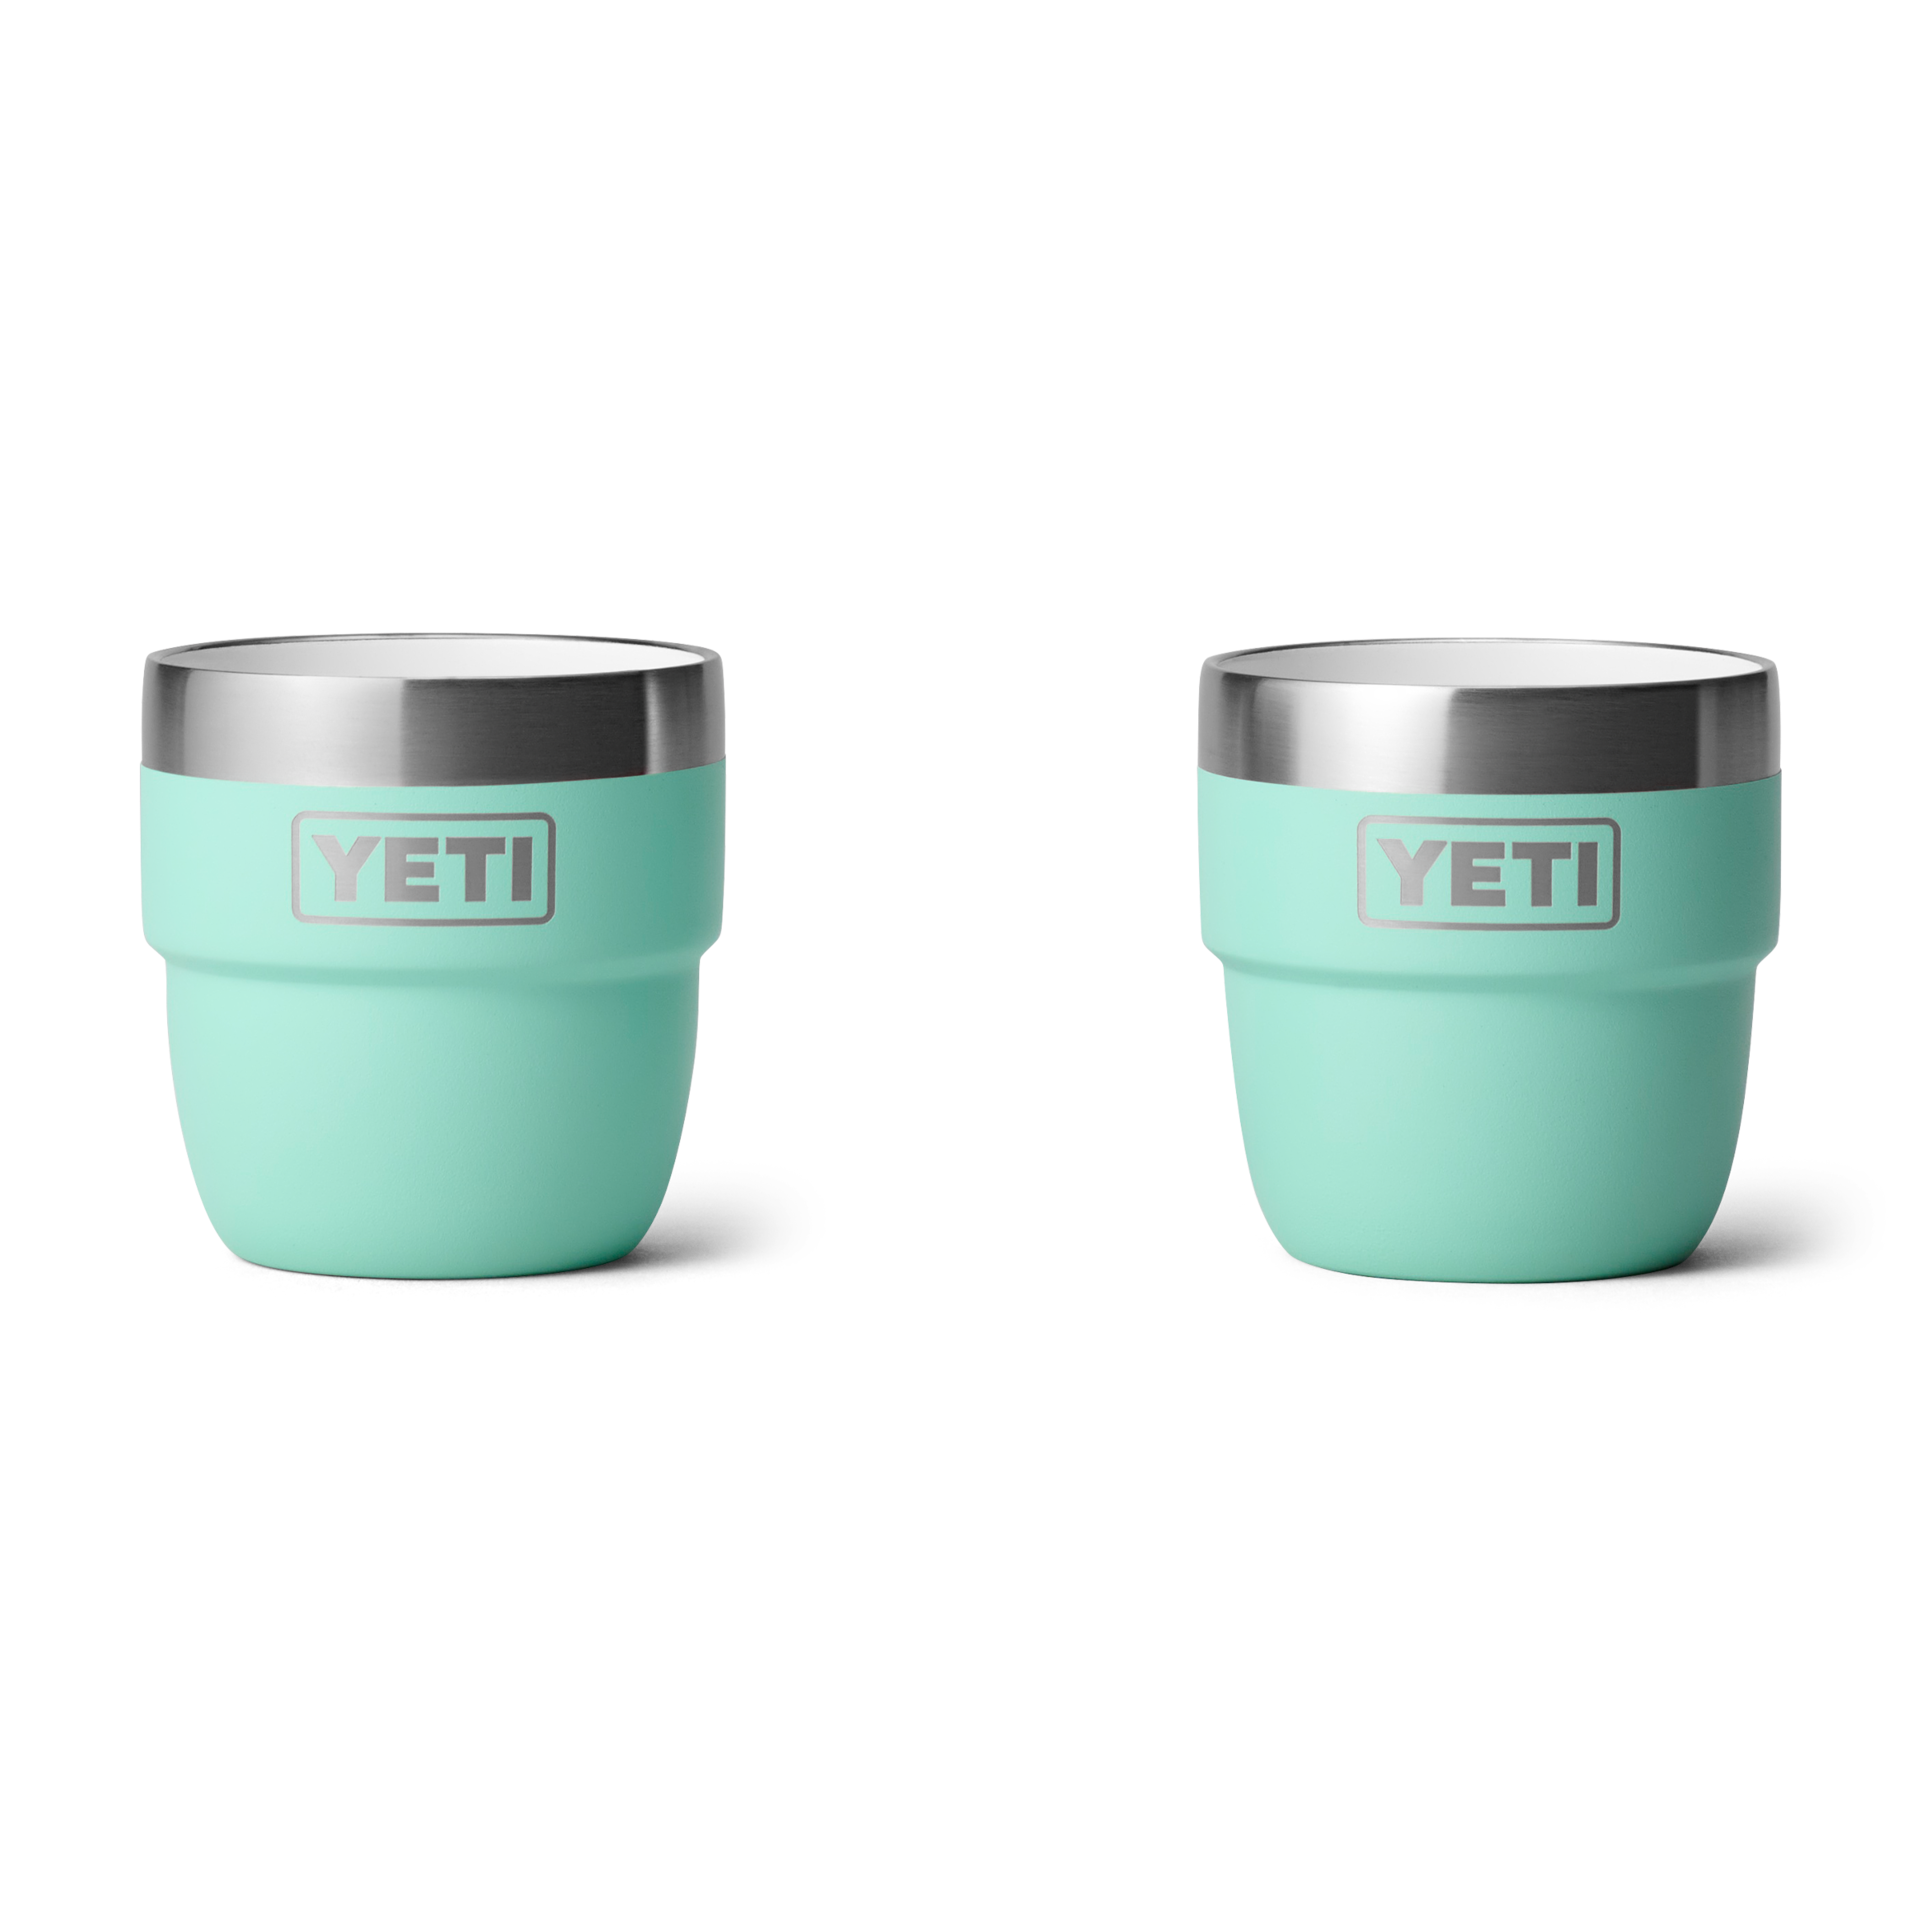 4 oz. / 118ml Stackable Cups - Seafoam (2 pack)